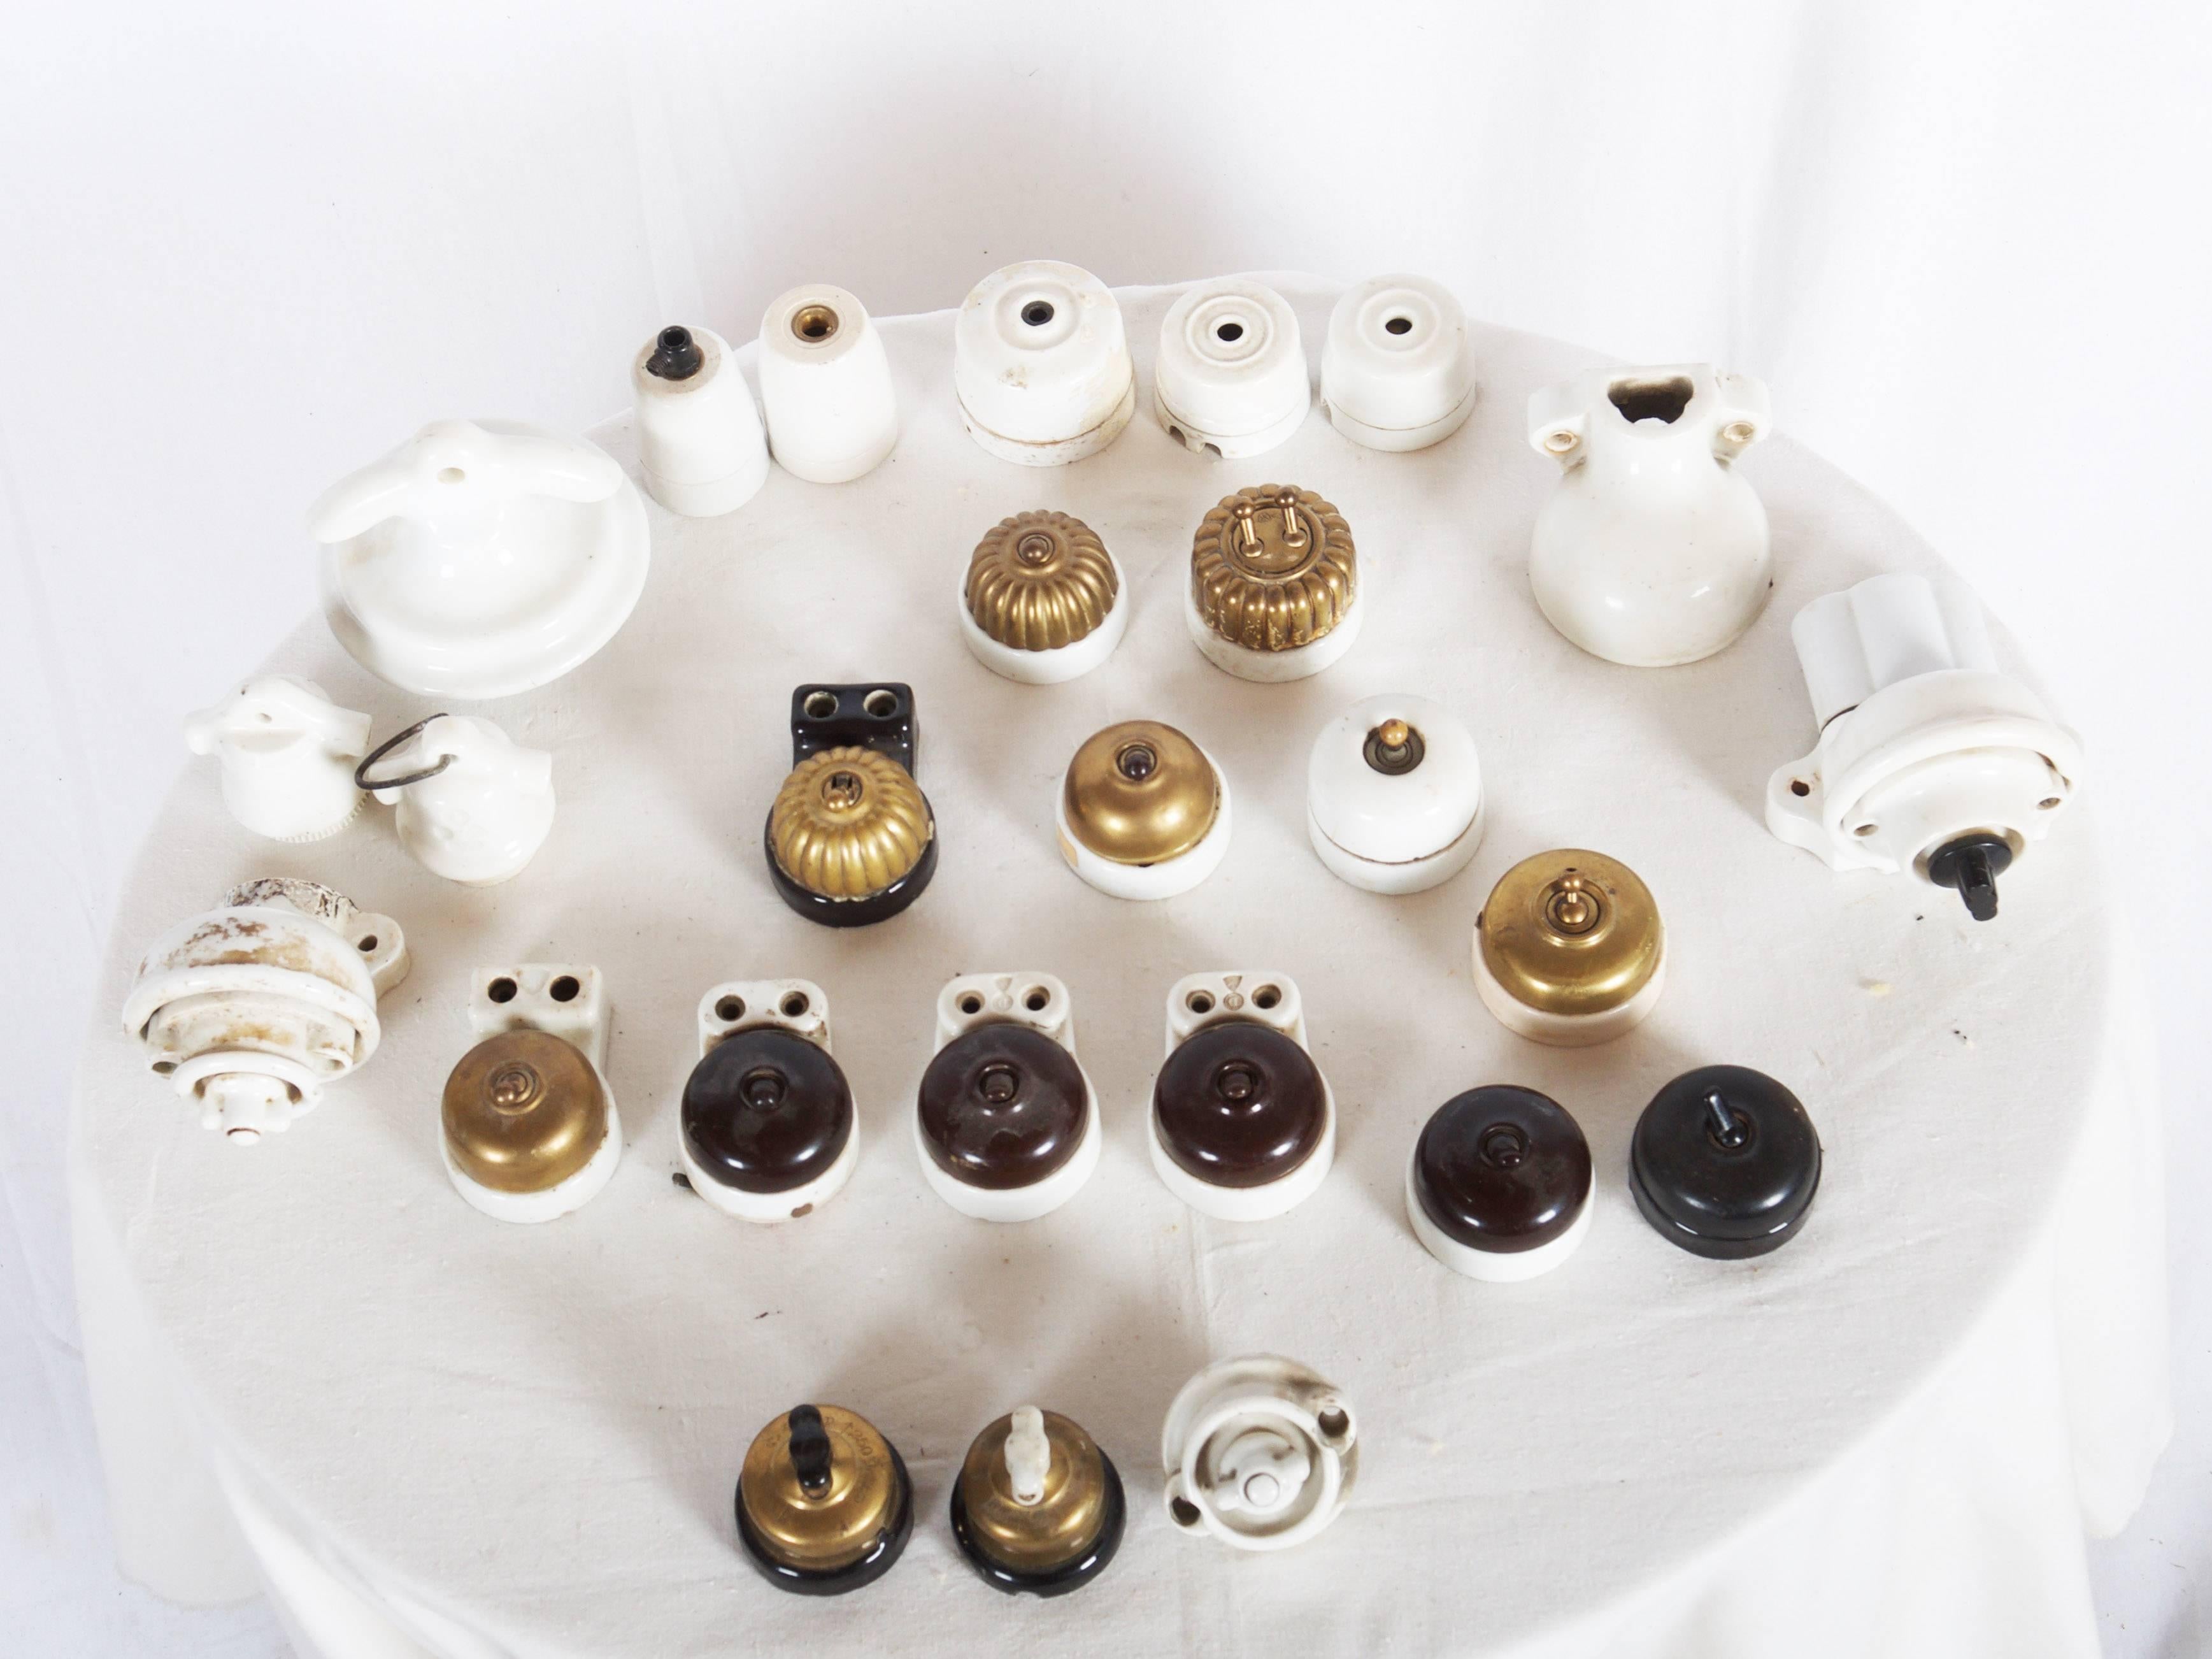 Collection of 15 div. older wall switches bakelite, brass and porcelain. Furthermore, 11 div. electrical parts, including sockets of porcelain. 
Original condition with traces of age and minor defects.